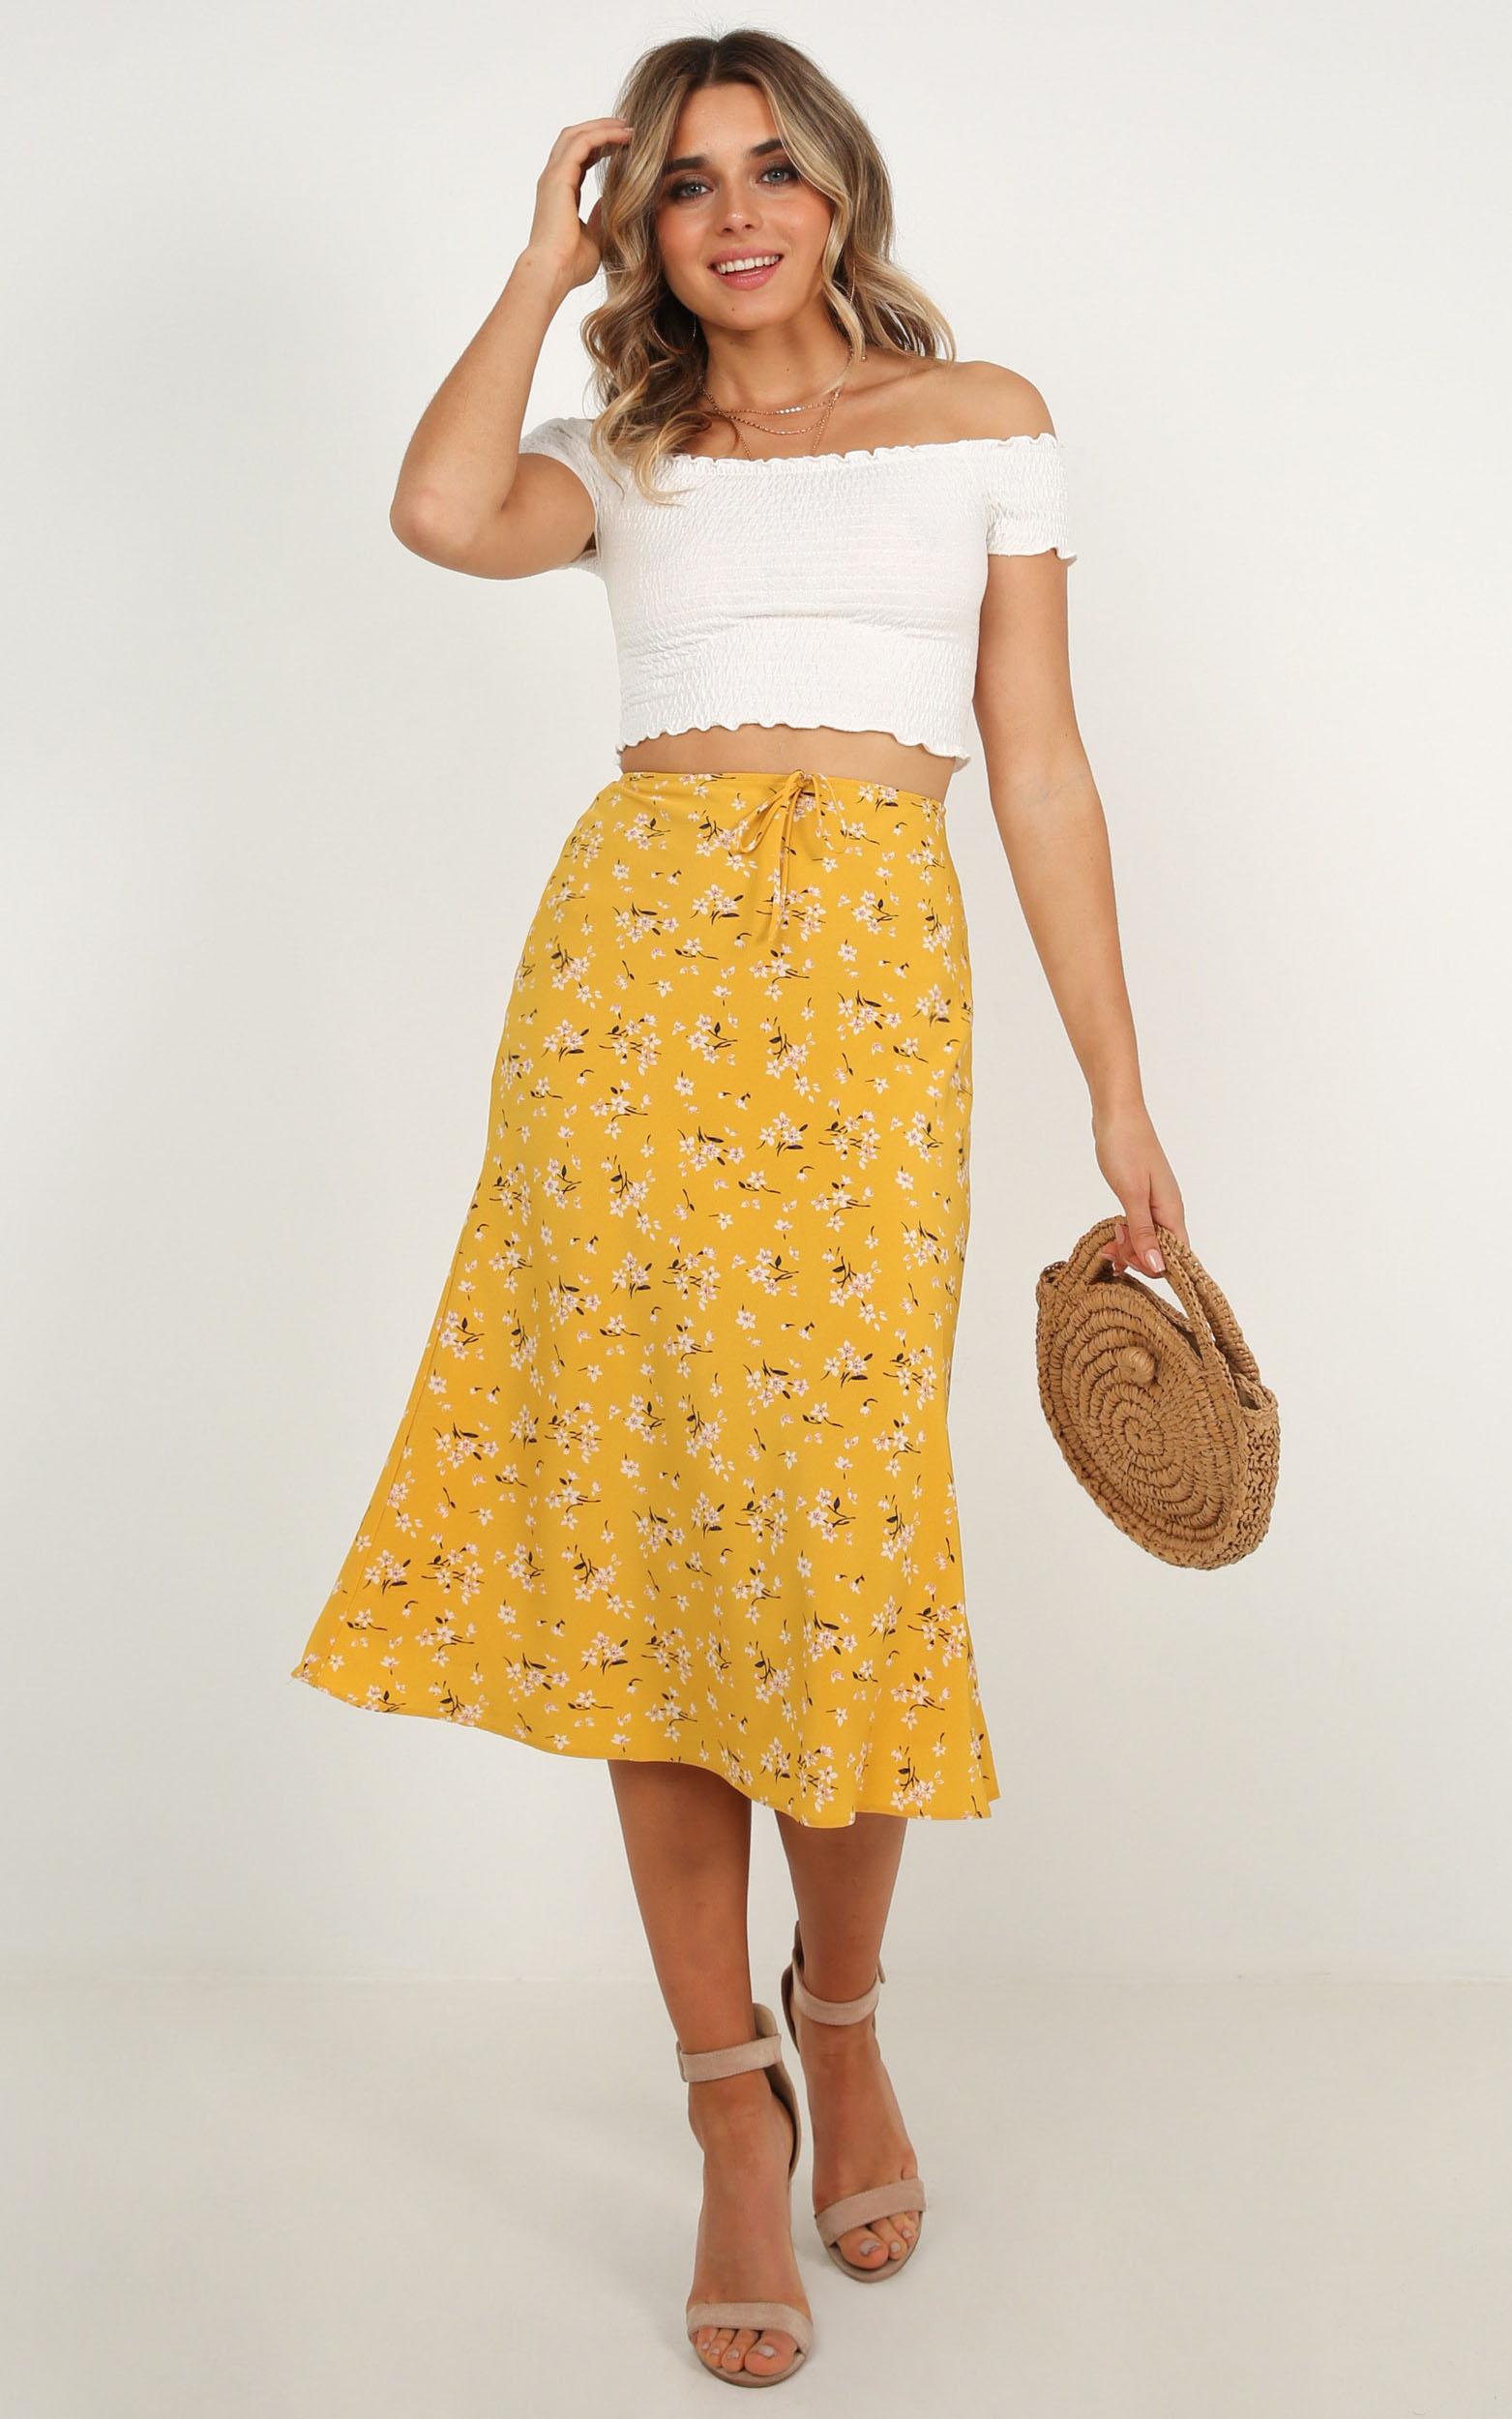 Lemon Squeeze Skirt In Yellow Floral | Showpo